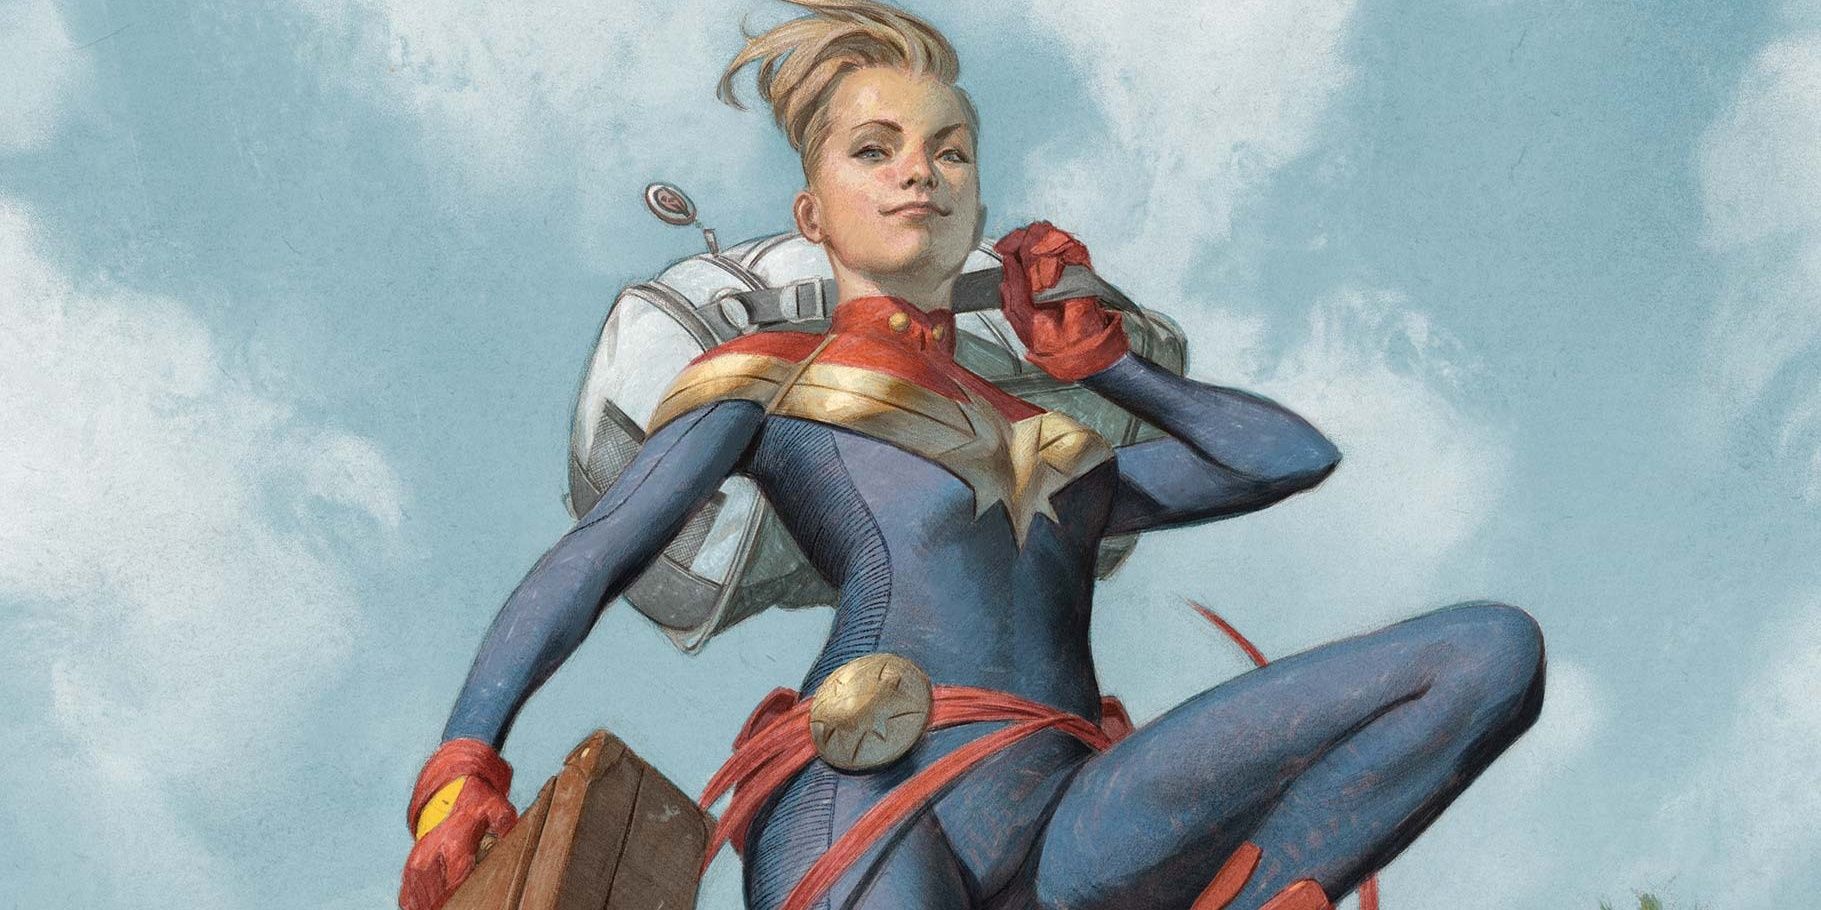 Captain Marvel flying through the air with luggage